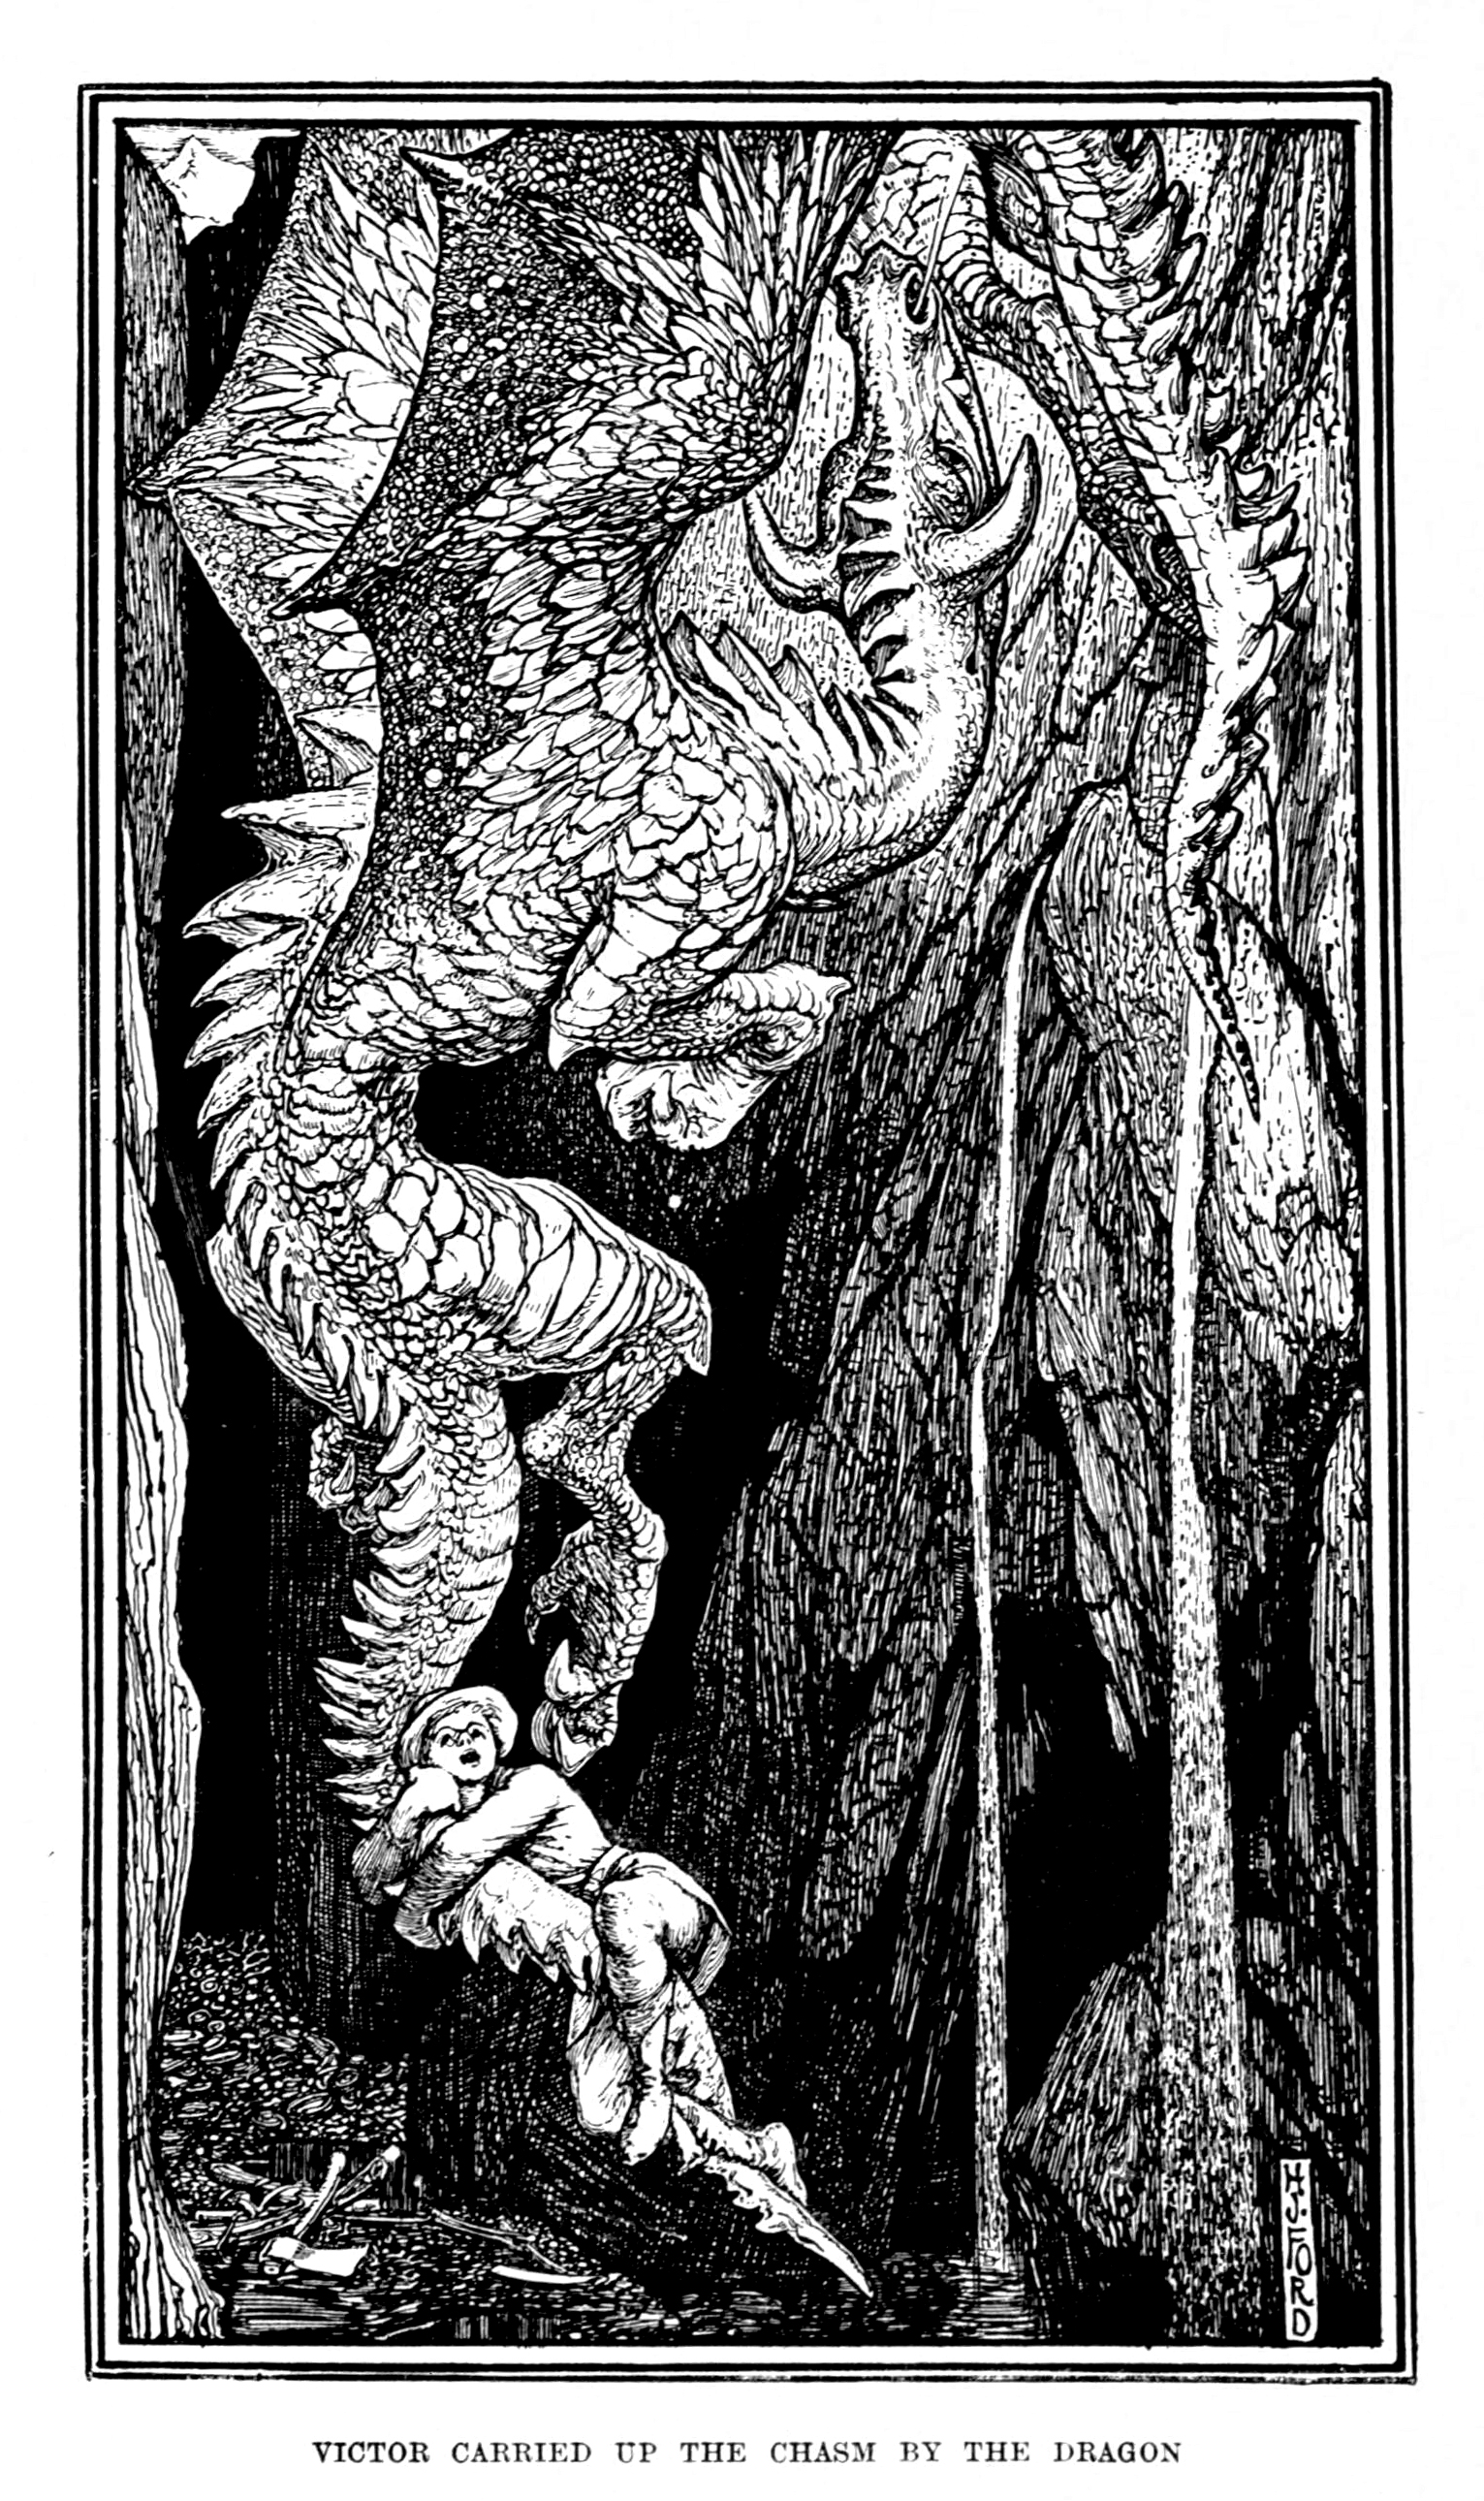 Henry Justice Ford - The red book of animal stories selected and edited by Andrew Lang, 1899 (illustration 5)